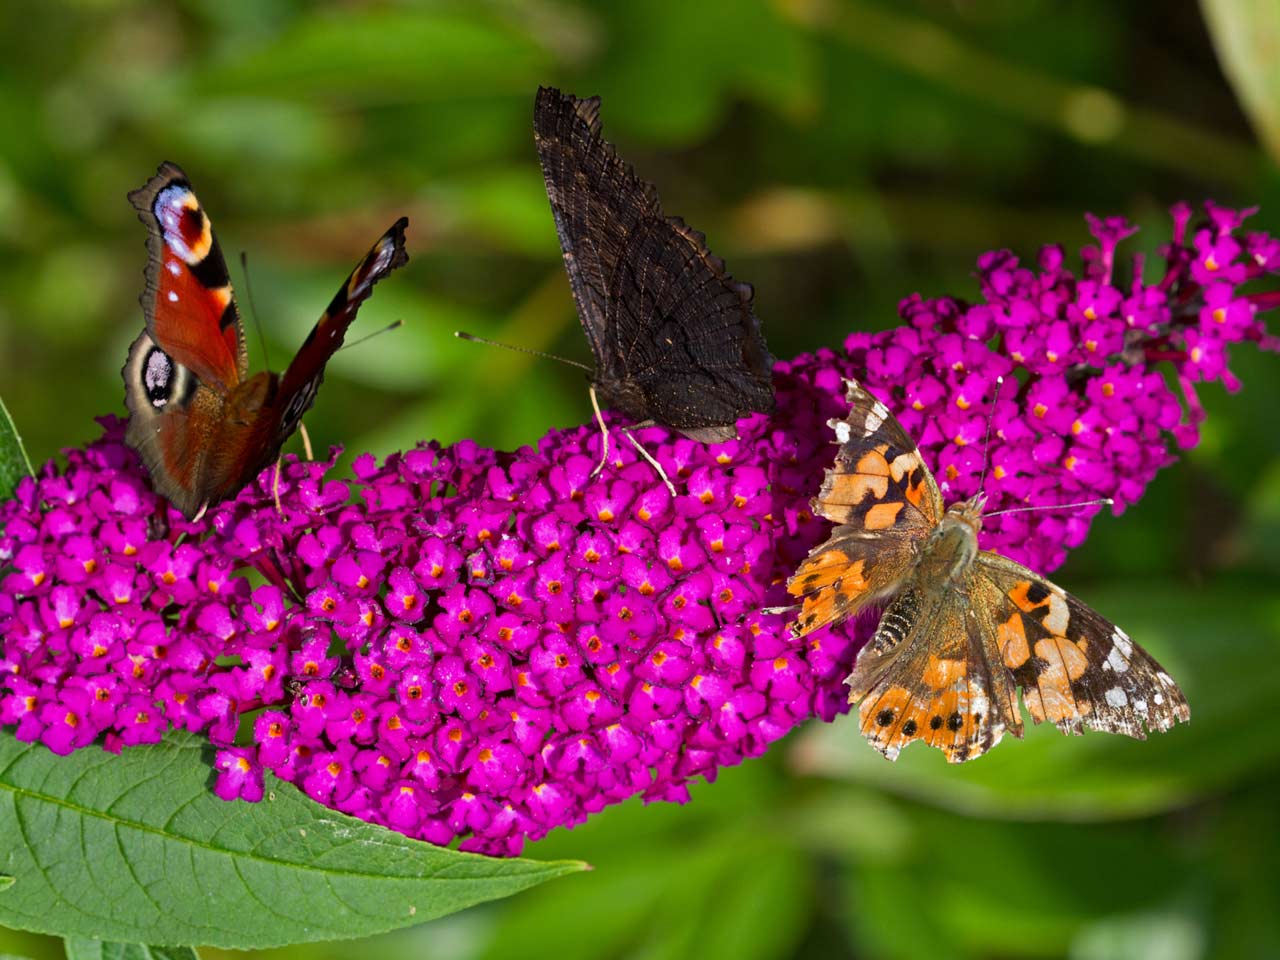 What are some good plants for attracting butterflies?